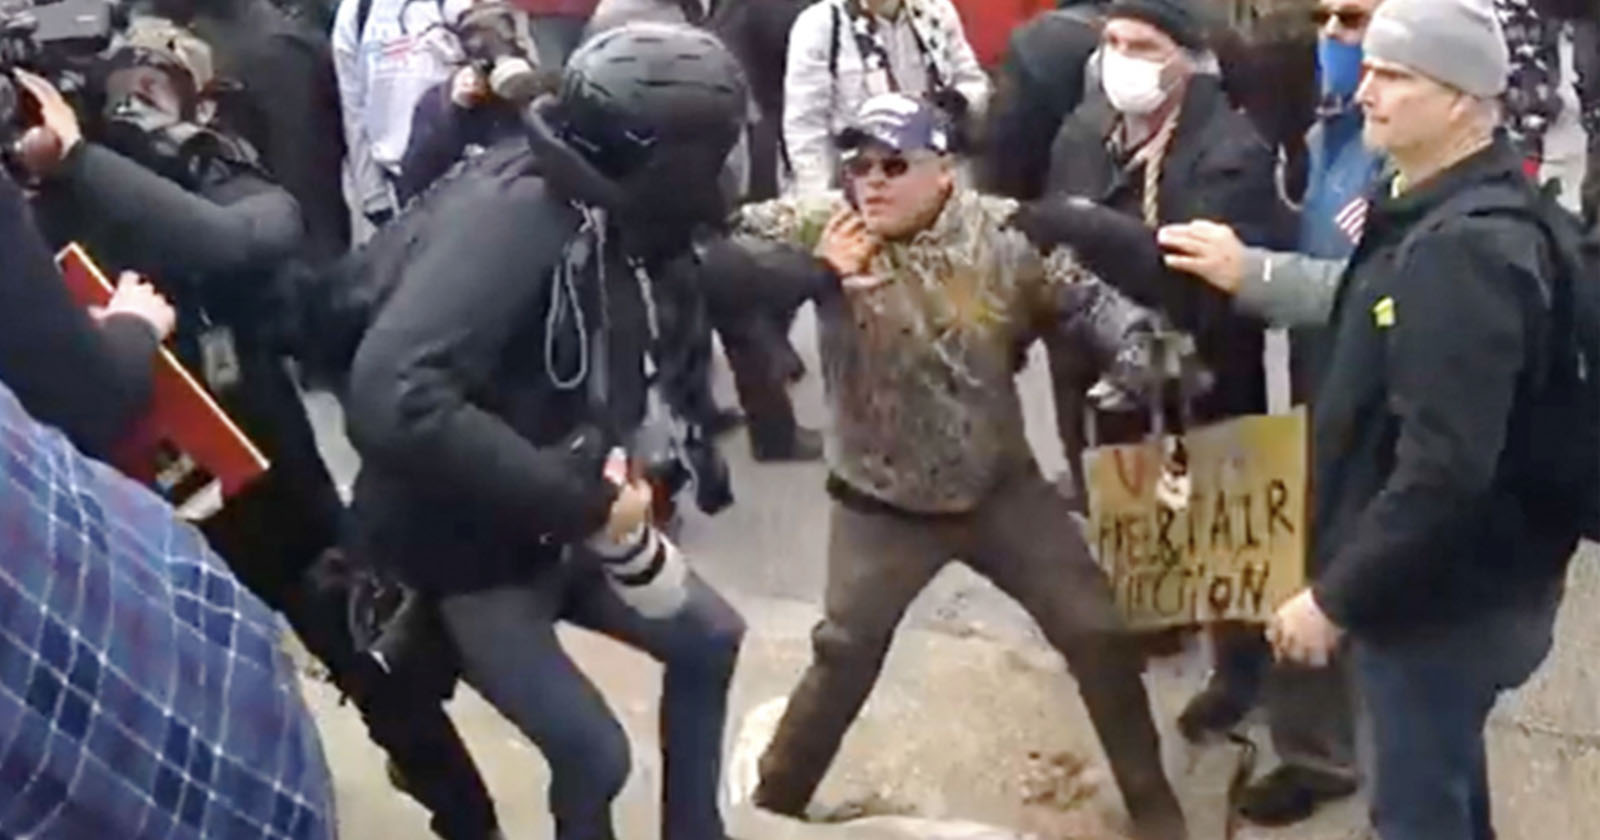 Capitol Rioter Who Attacked Photographer is Sentenced to 5 Years